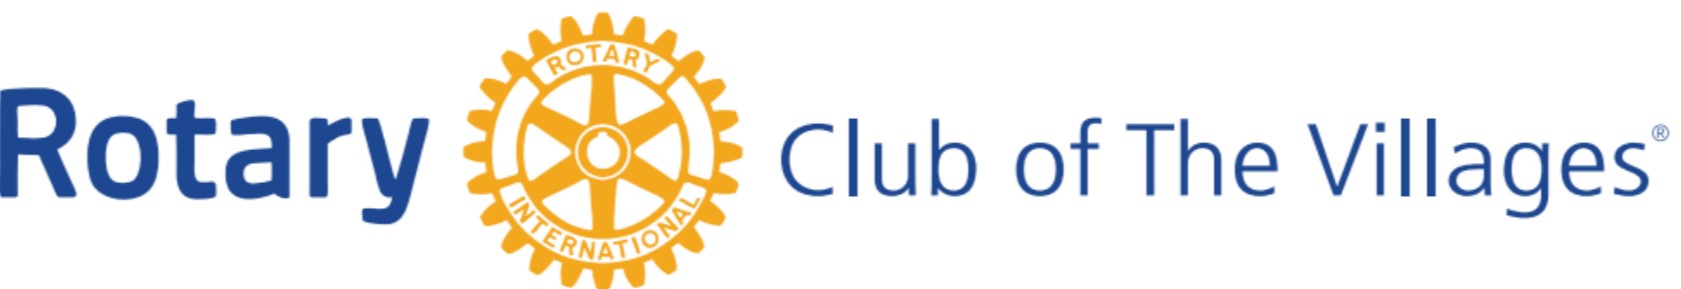 c.Rotary Club of The Villages (Tier 3)